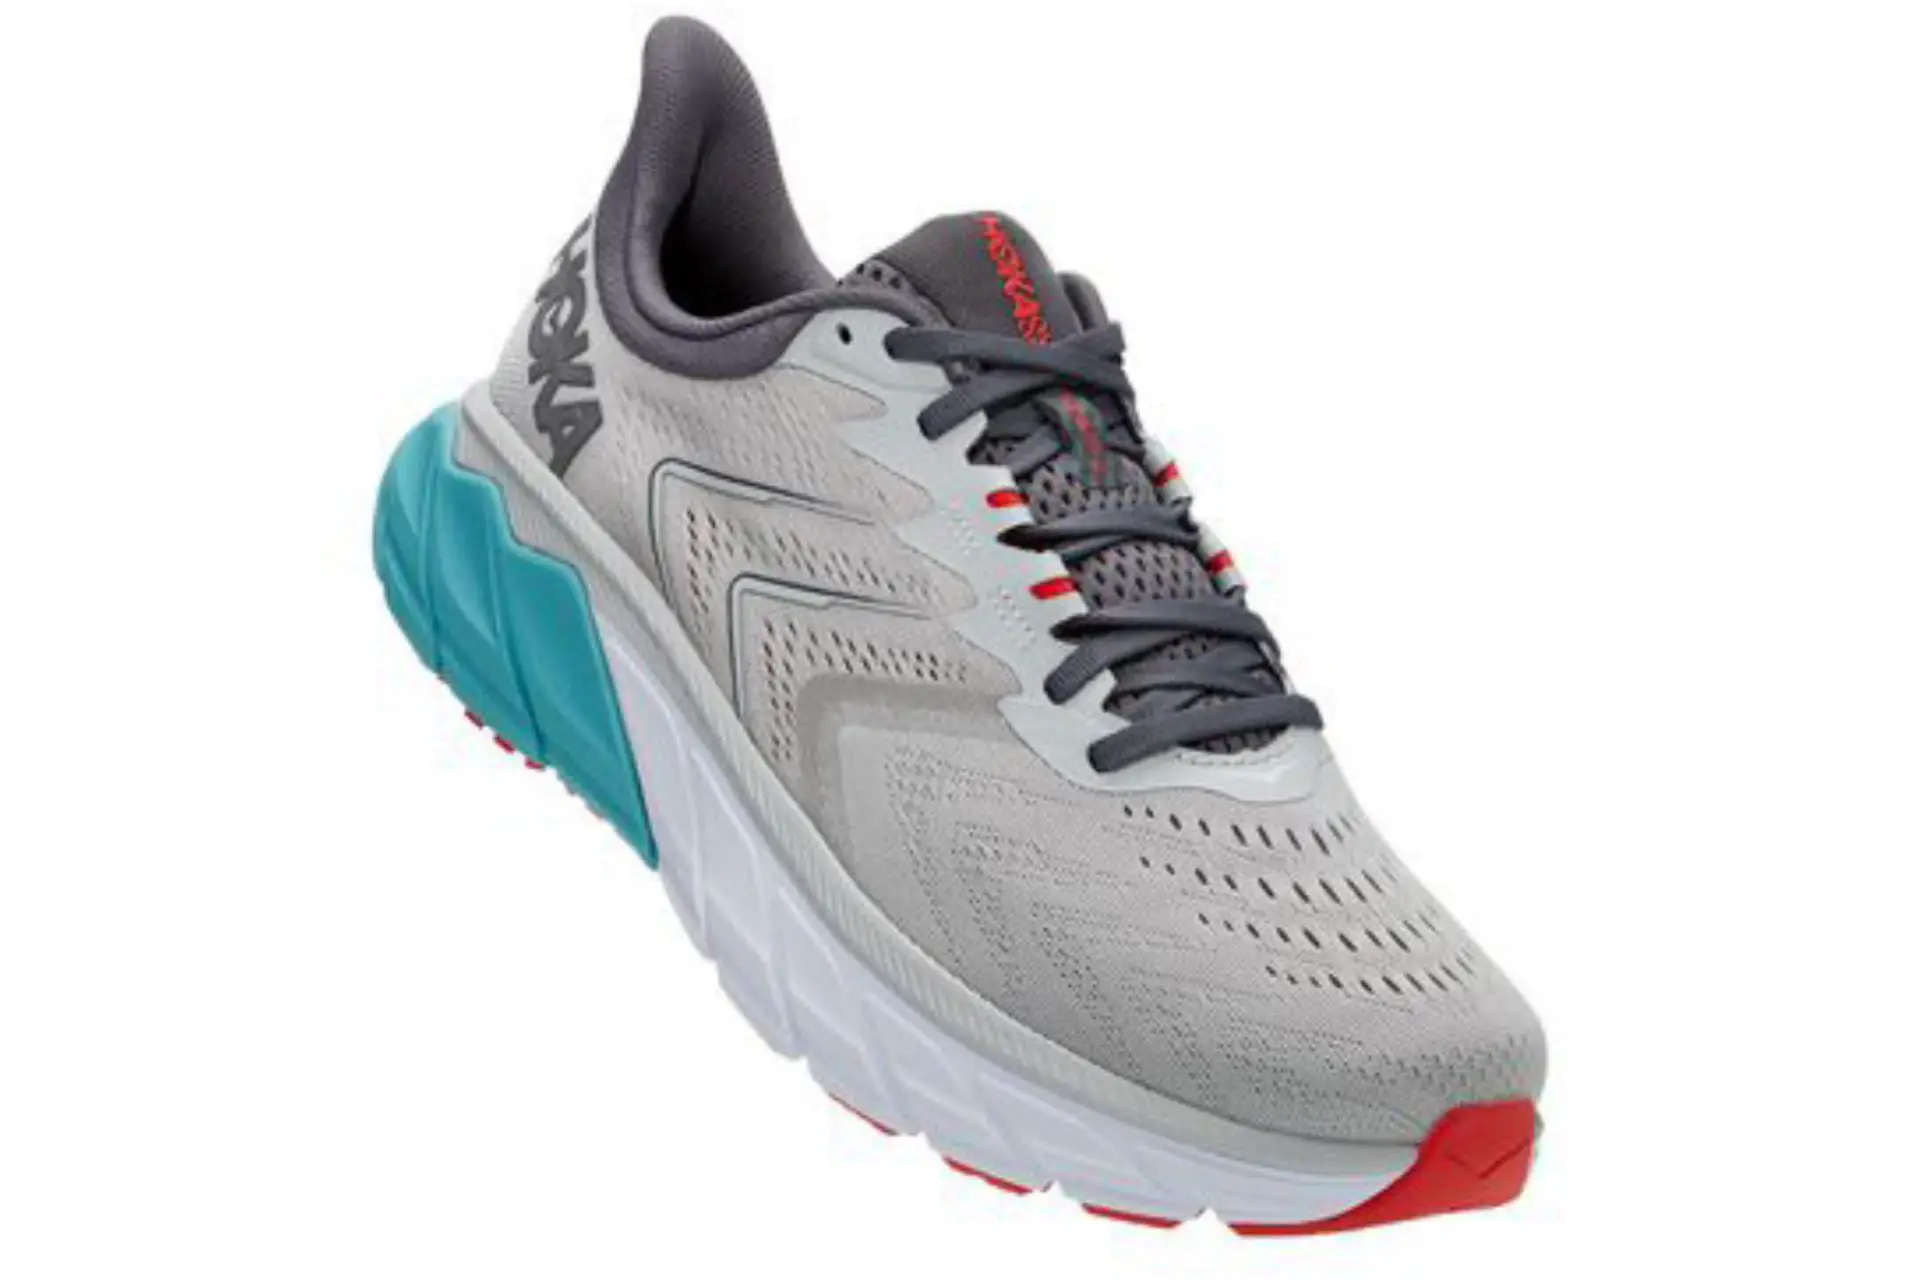 Best Hoka One One Shoes for Plantar Fasciitis